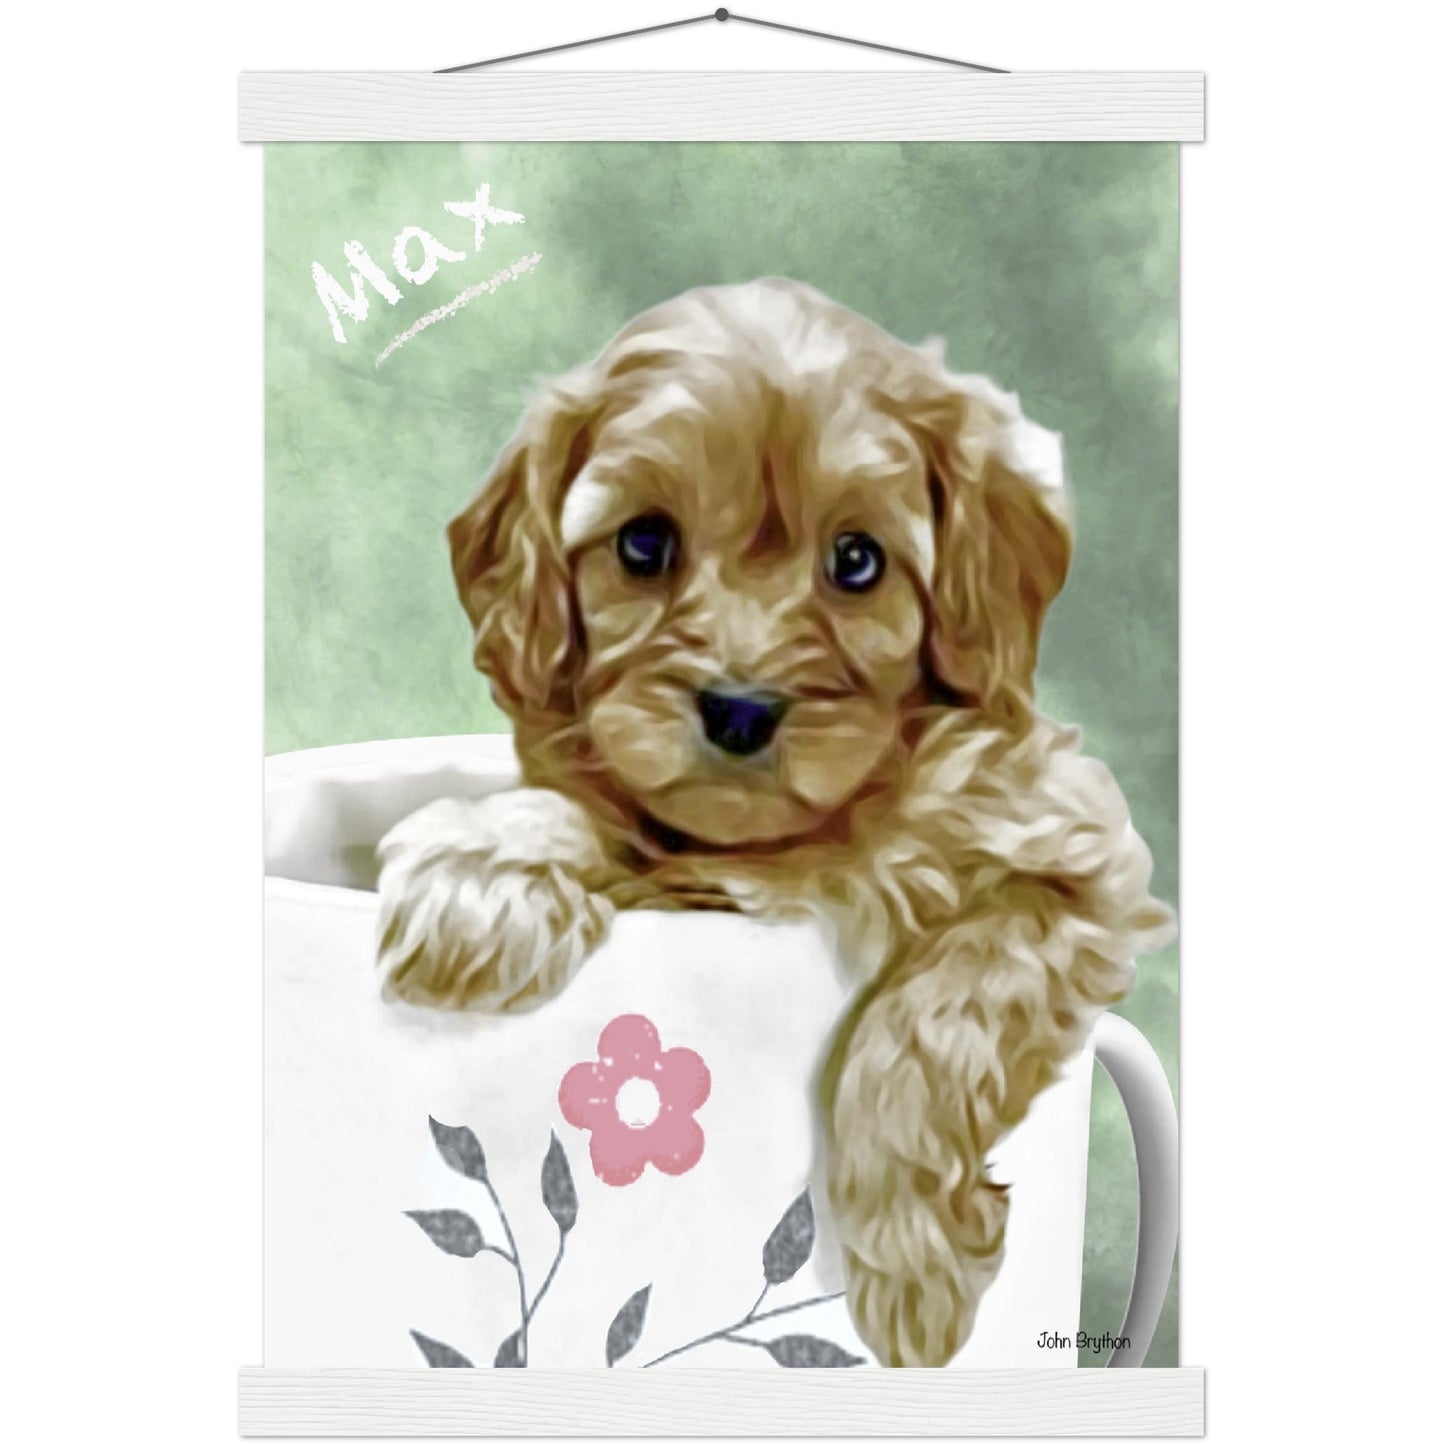 Puppy In A Mug Poster With Hangers by John Brython